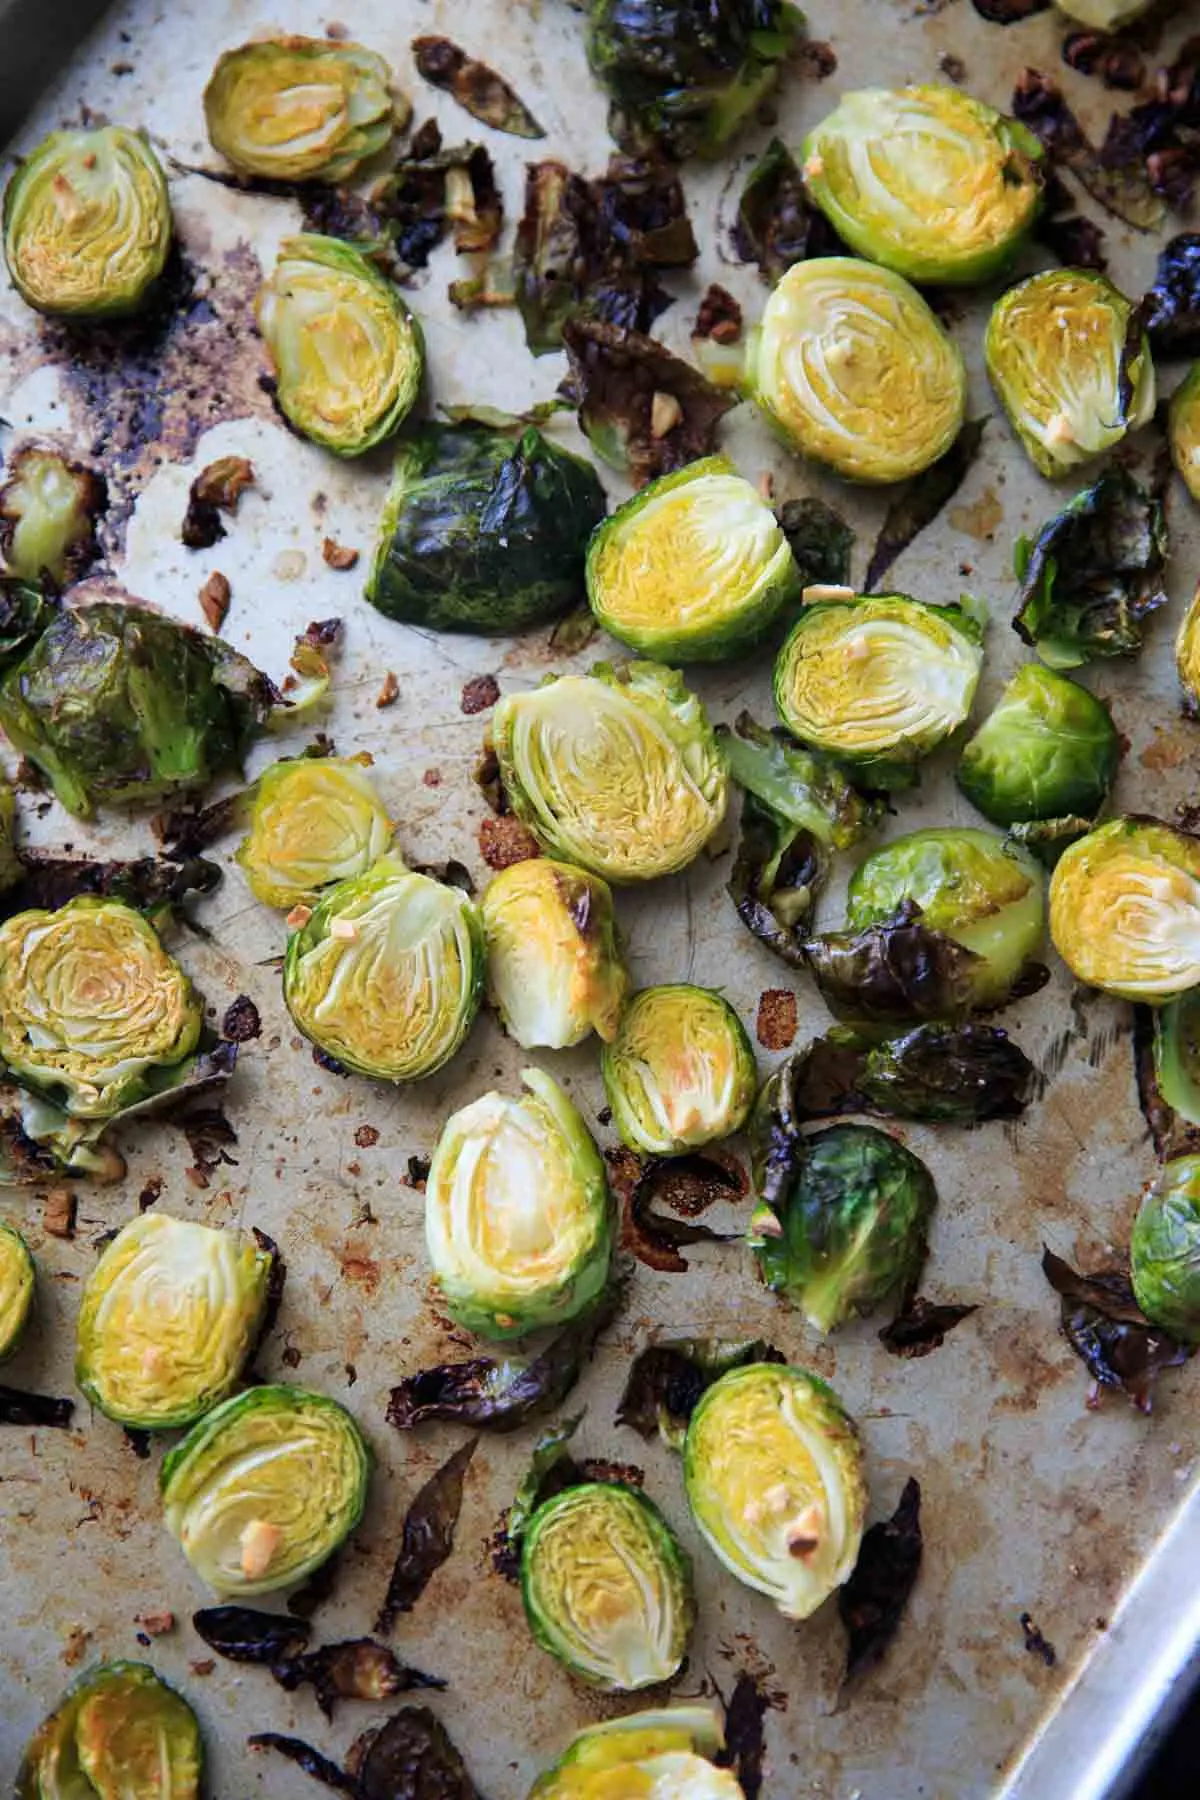 Lemony Brussels Sprouts after roasting